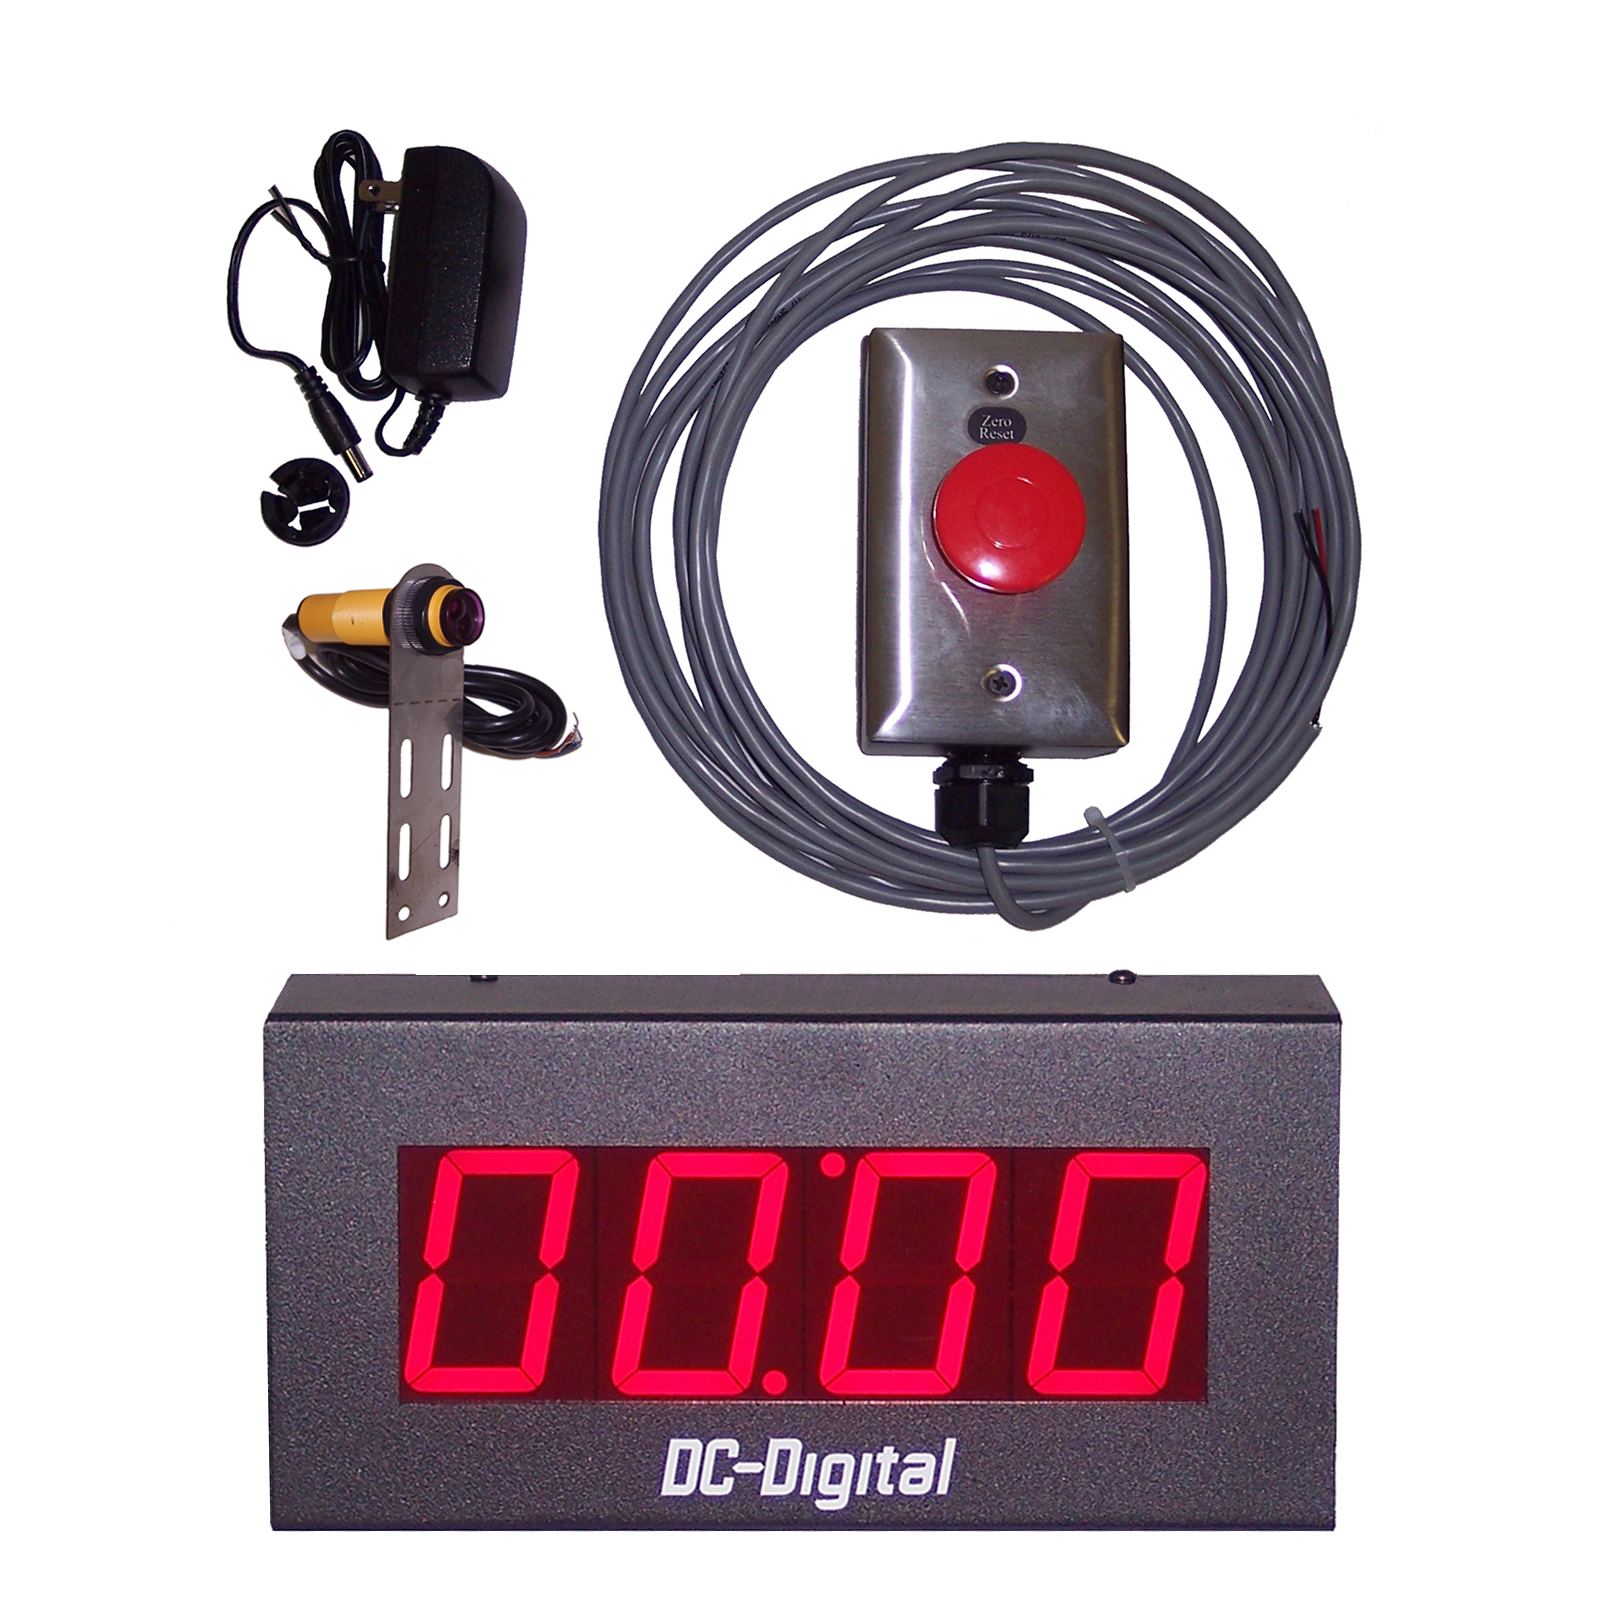 (DC-25T-UP-PKG-SHRT) 2.3 Inch LED Digital, Process Count Up Timer Package, Includes: Short Range Diffused Photo-Reflective Sensor and Mount (adj. to 10 Inches), 40mm Reset Palm Switch (J-Box, Stainless Cover, 25ft. Cabling) and Power Supply "Ships FREE !"